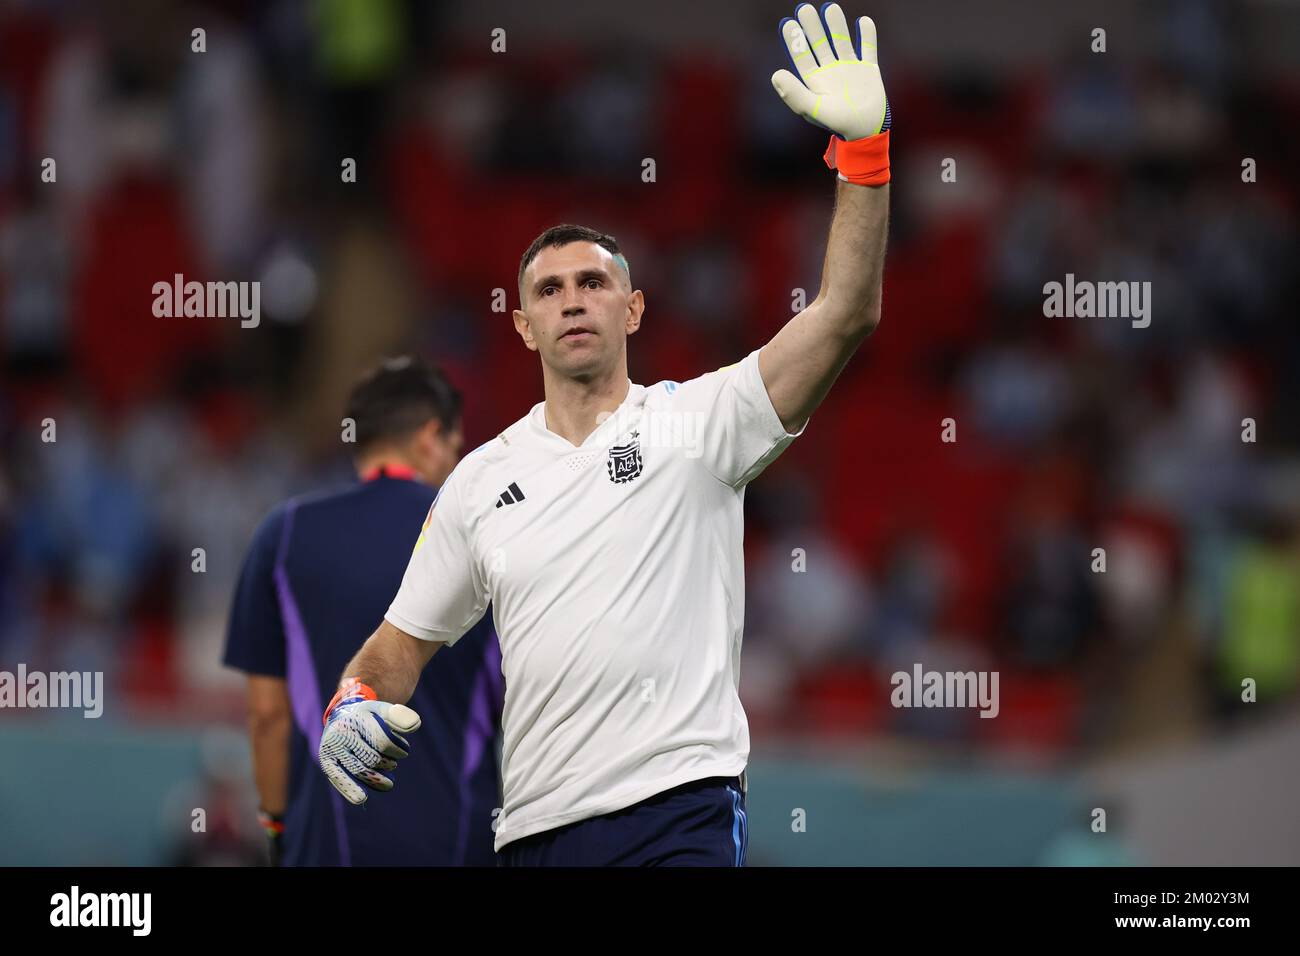 Doha, Qatar. 03rd Dec, 2022. Emiliano Martínez Argentina player moments before the match against Australia valid for the Round of 16 of the Qatar World Cup at Ahmad Bin Ali Stadium (AAS) in Doha Qatar on December 03, 2022 Credit: Brazil Photo Press/Alamy Live News Stock Photo